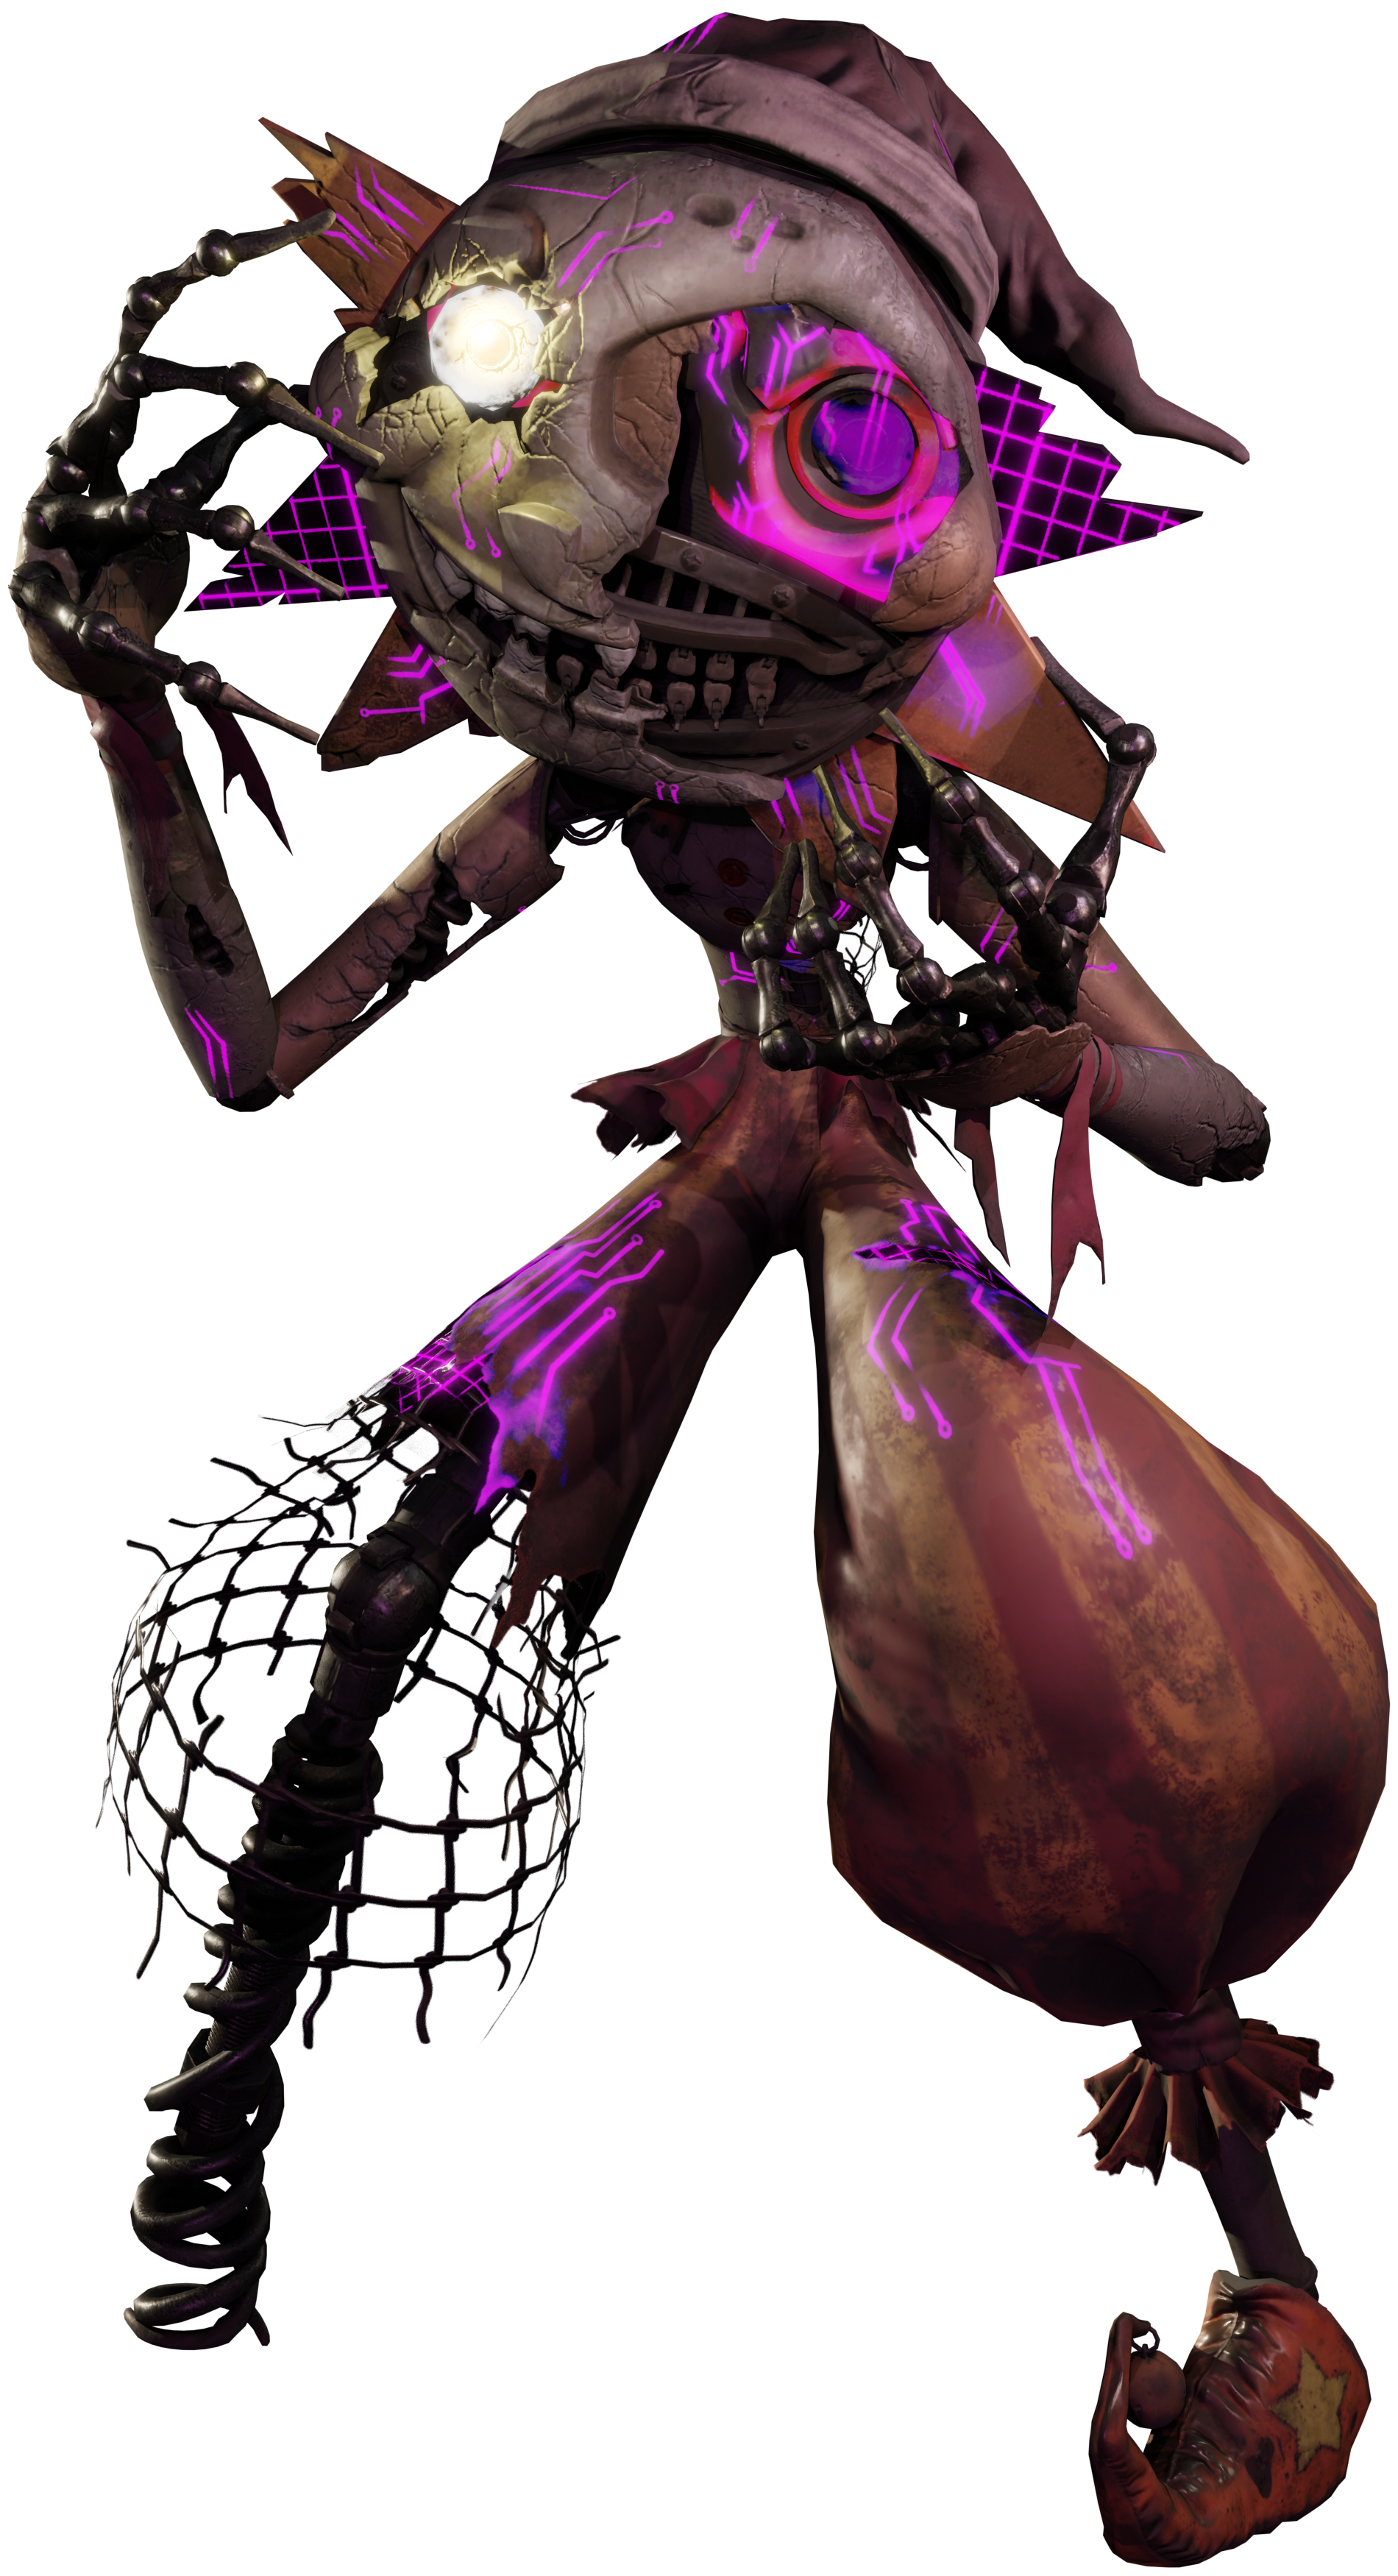 Withered Chica Fan Casting for Five Nights At Freddy's A Shattered  Awakening